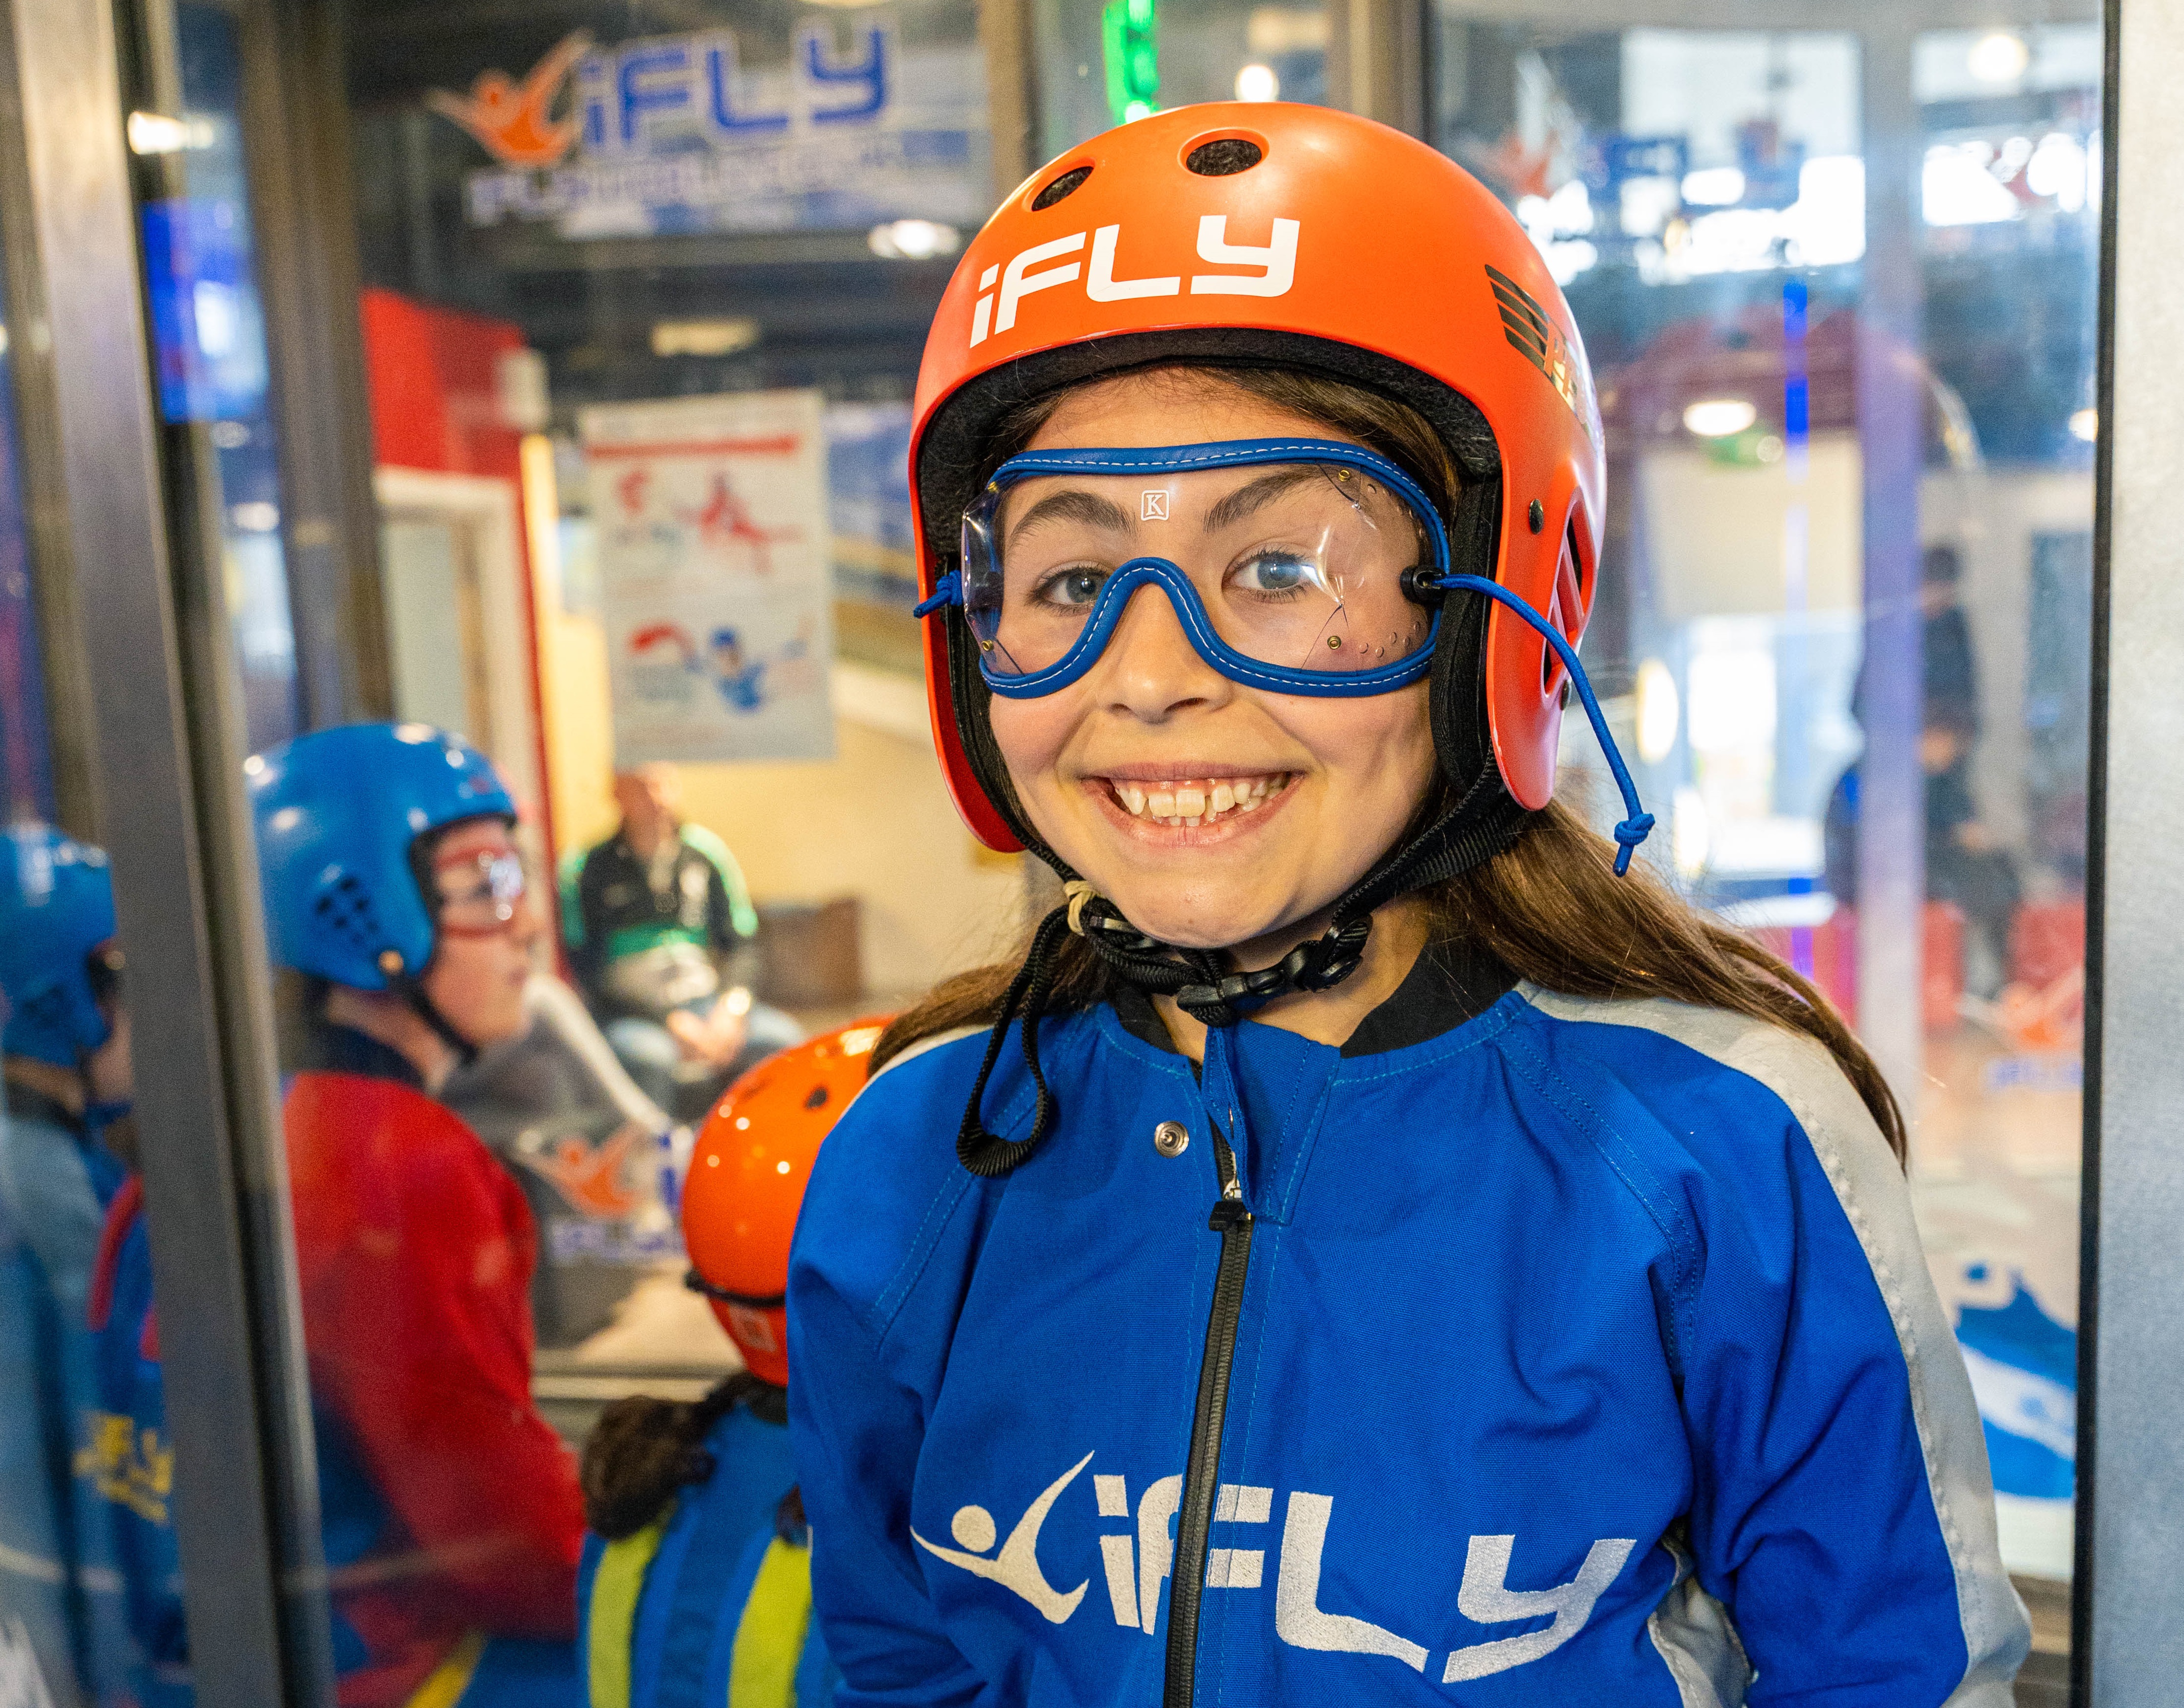 A girl smiles at the camera, she wears a light blue flight suit and orange safety helmet. She stands infront of the iFLY indoor skydiving wind tunnel.